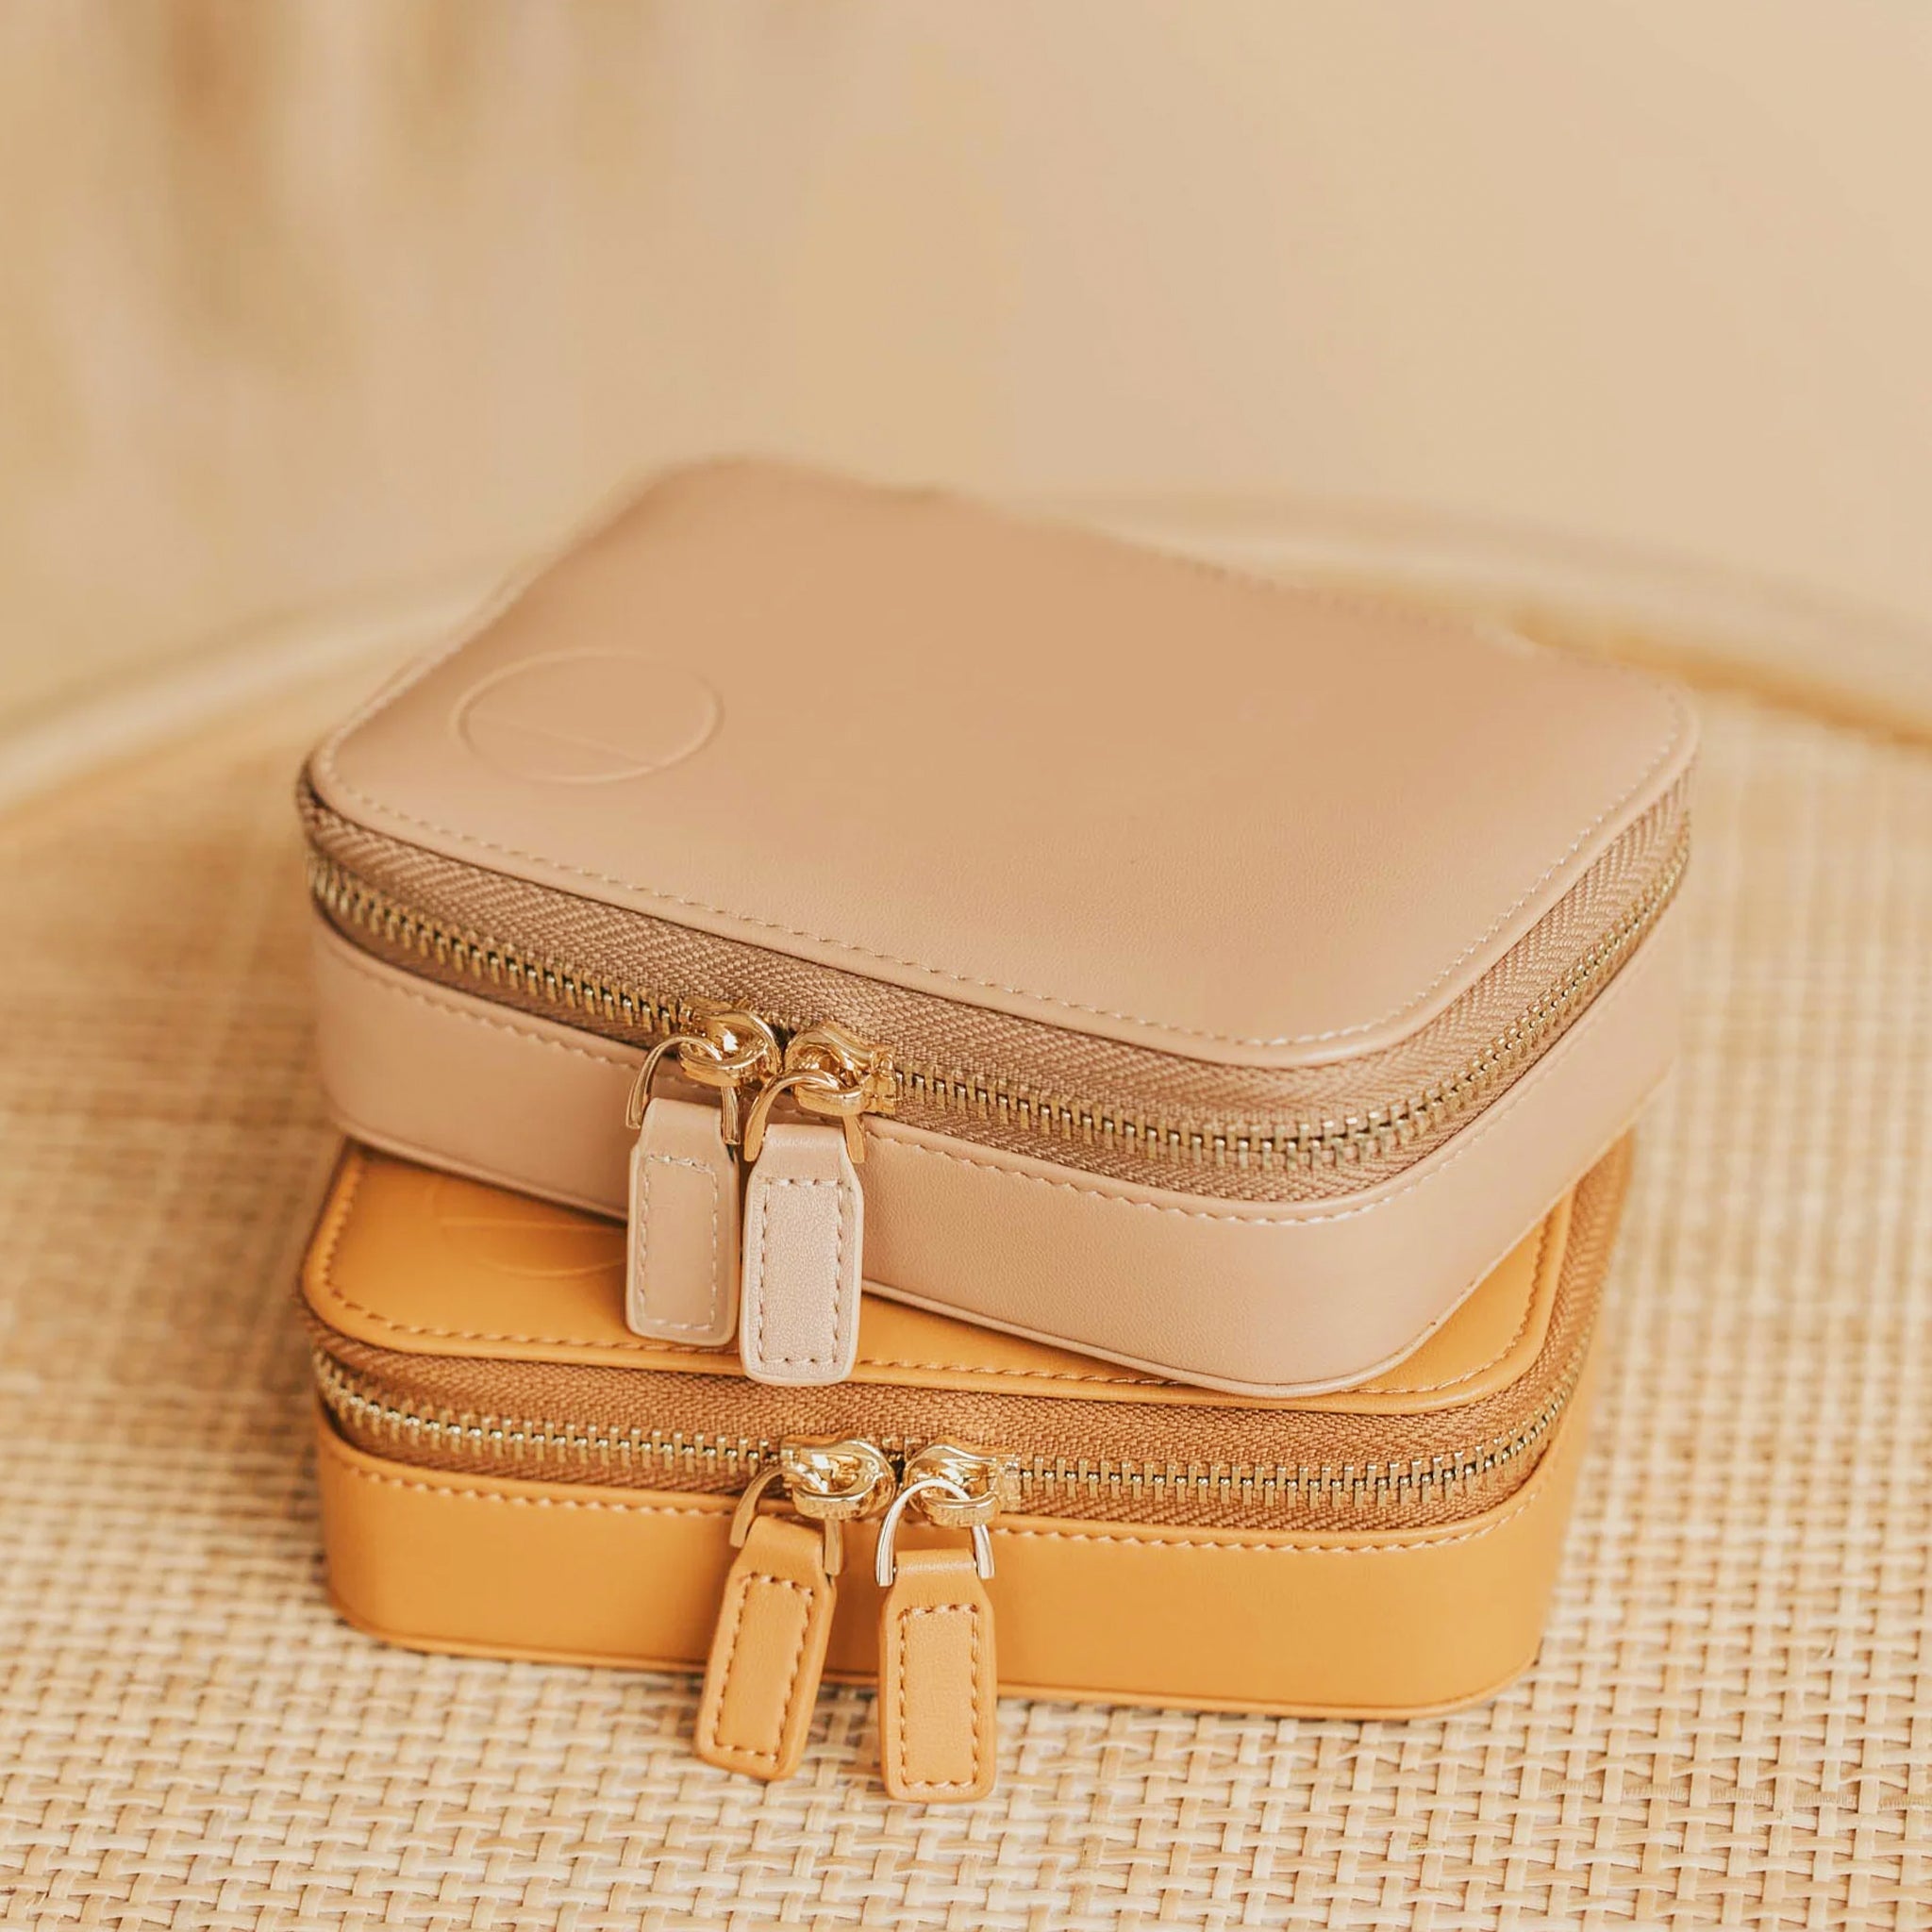 The sand travel jewelry case with a double zipper on top of a different colored case.  